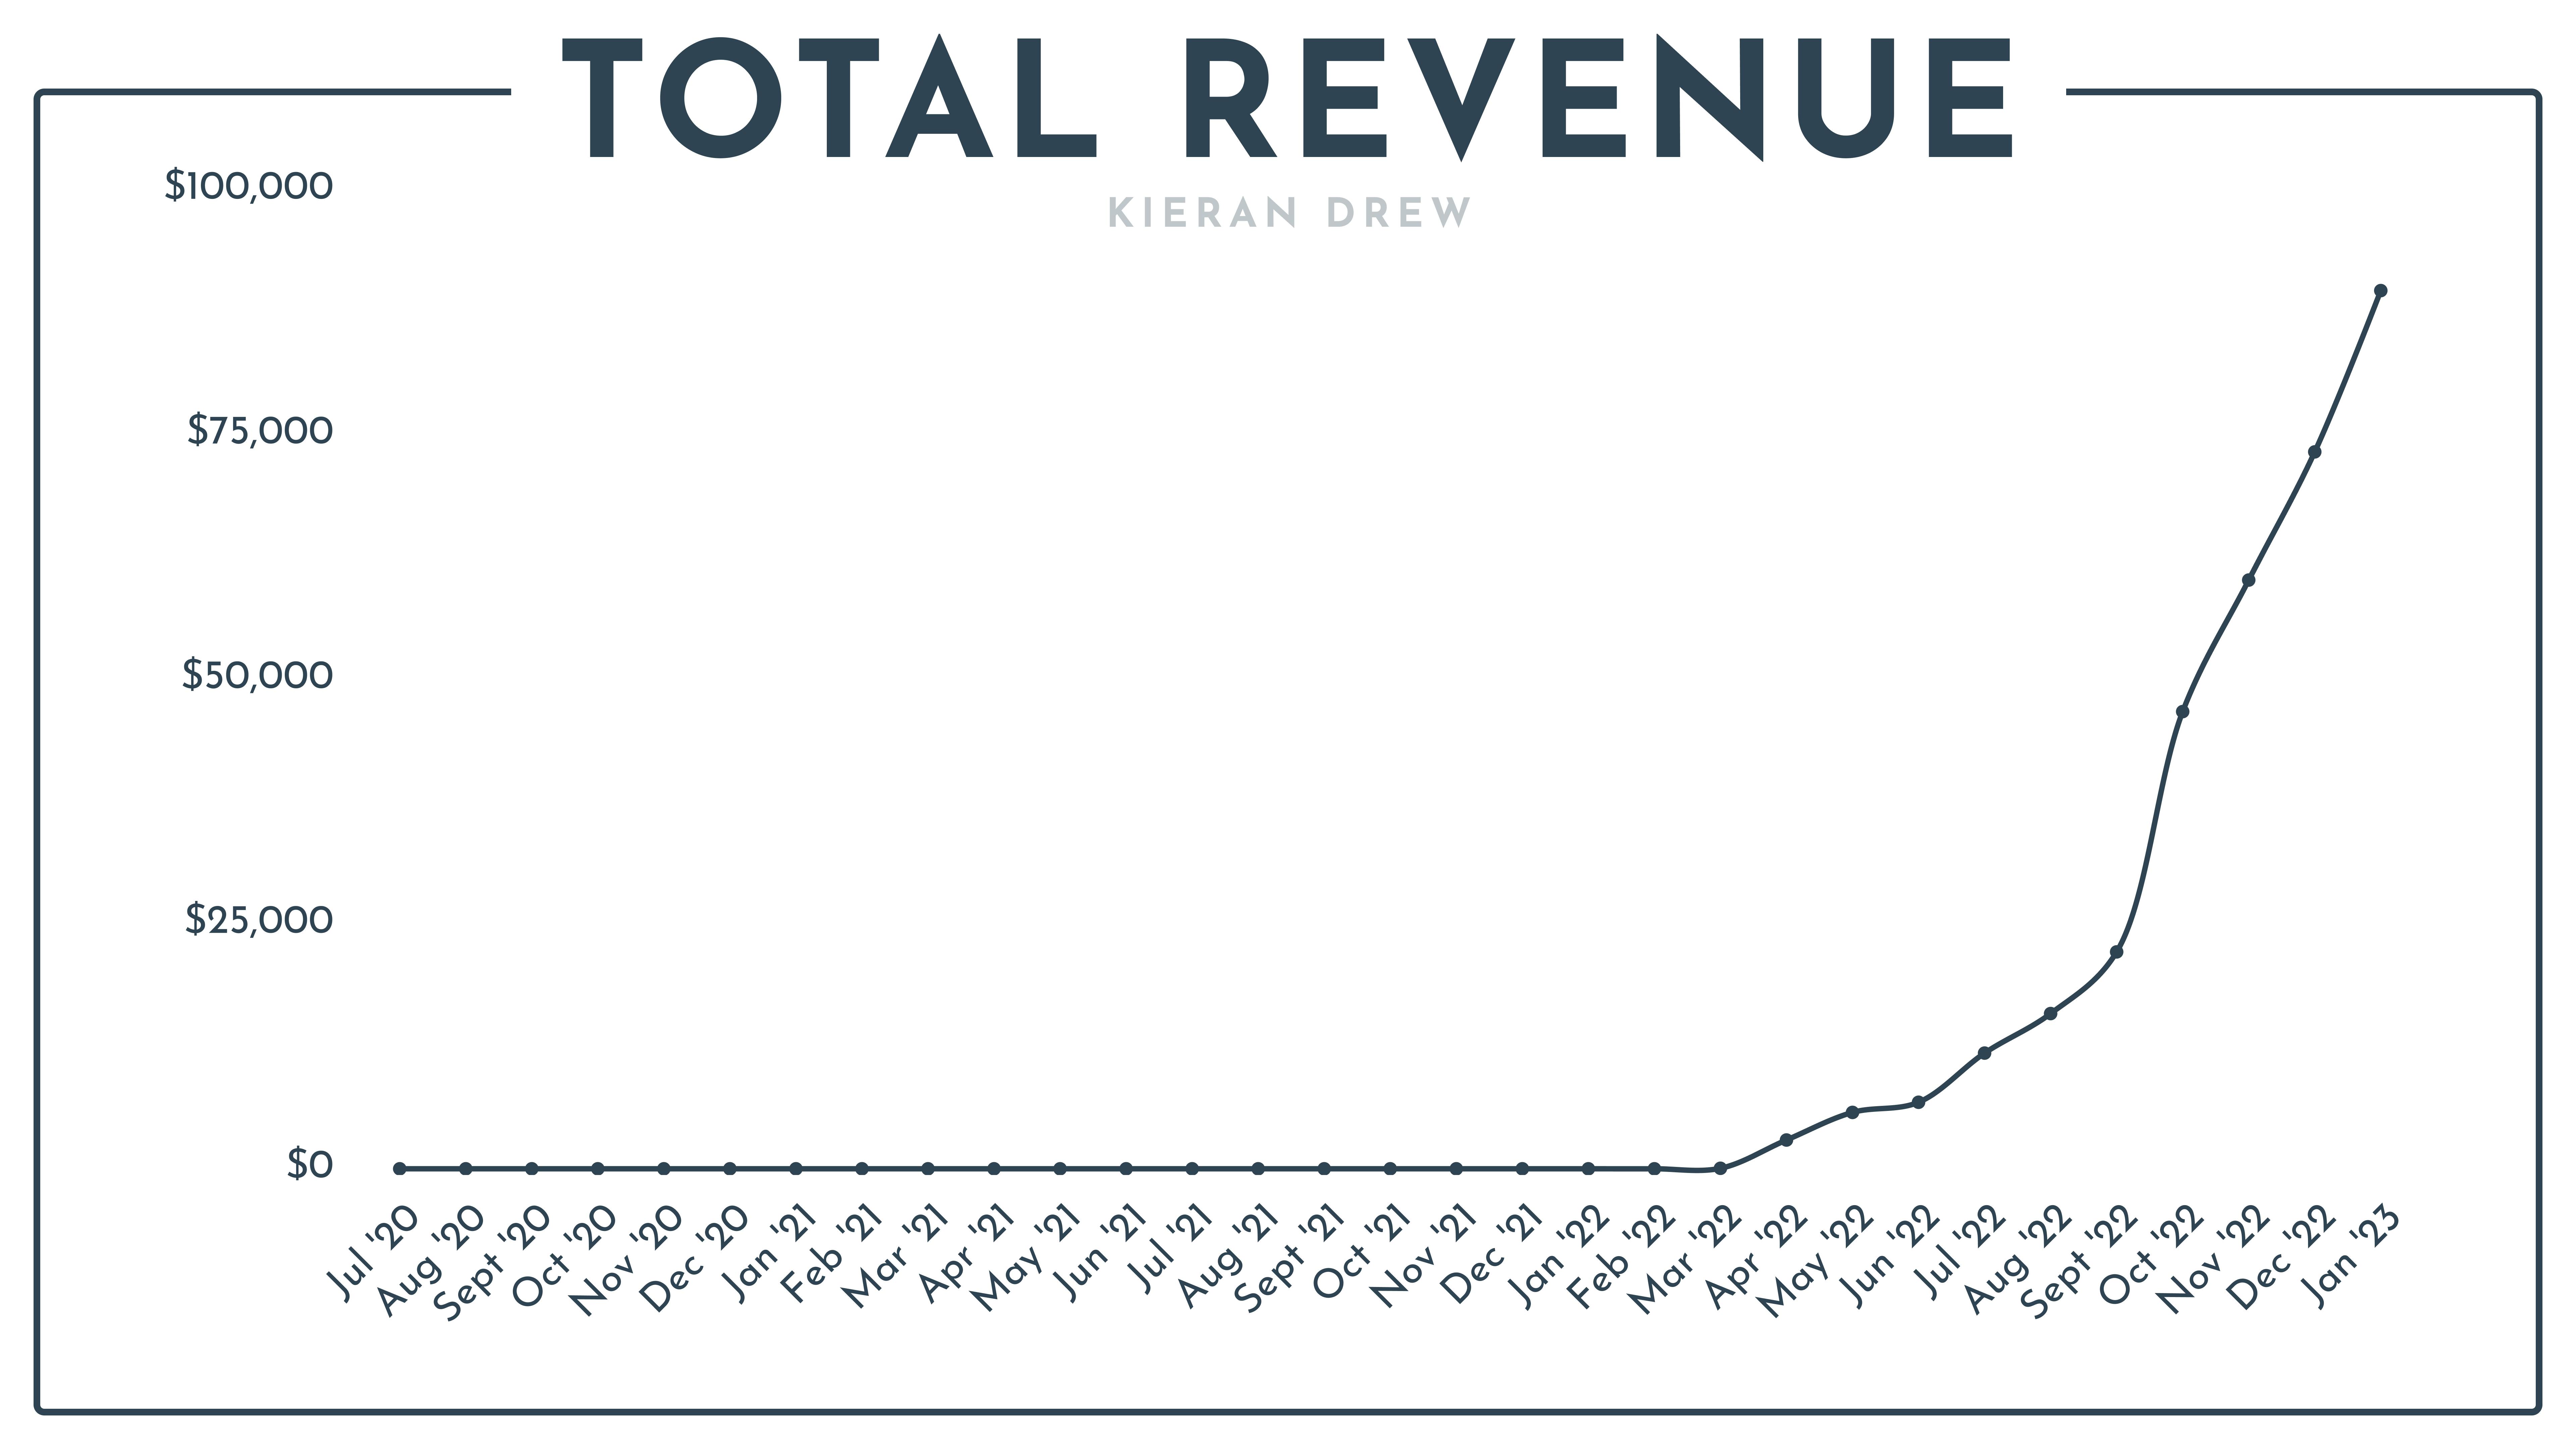 TOTAL REVENUE LINE CHART ALL TIME